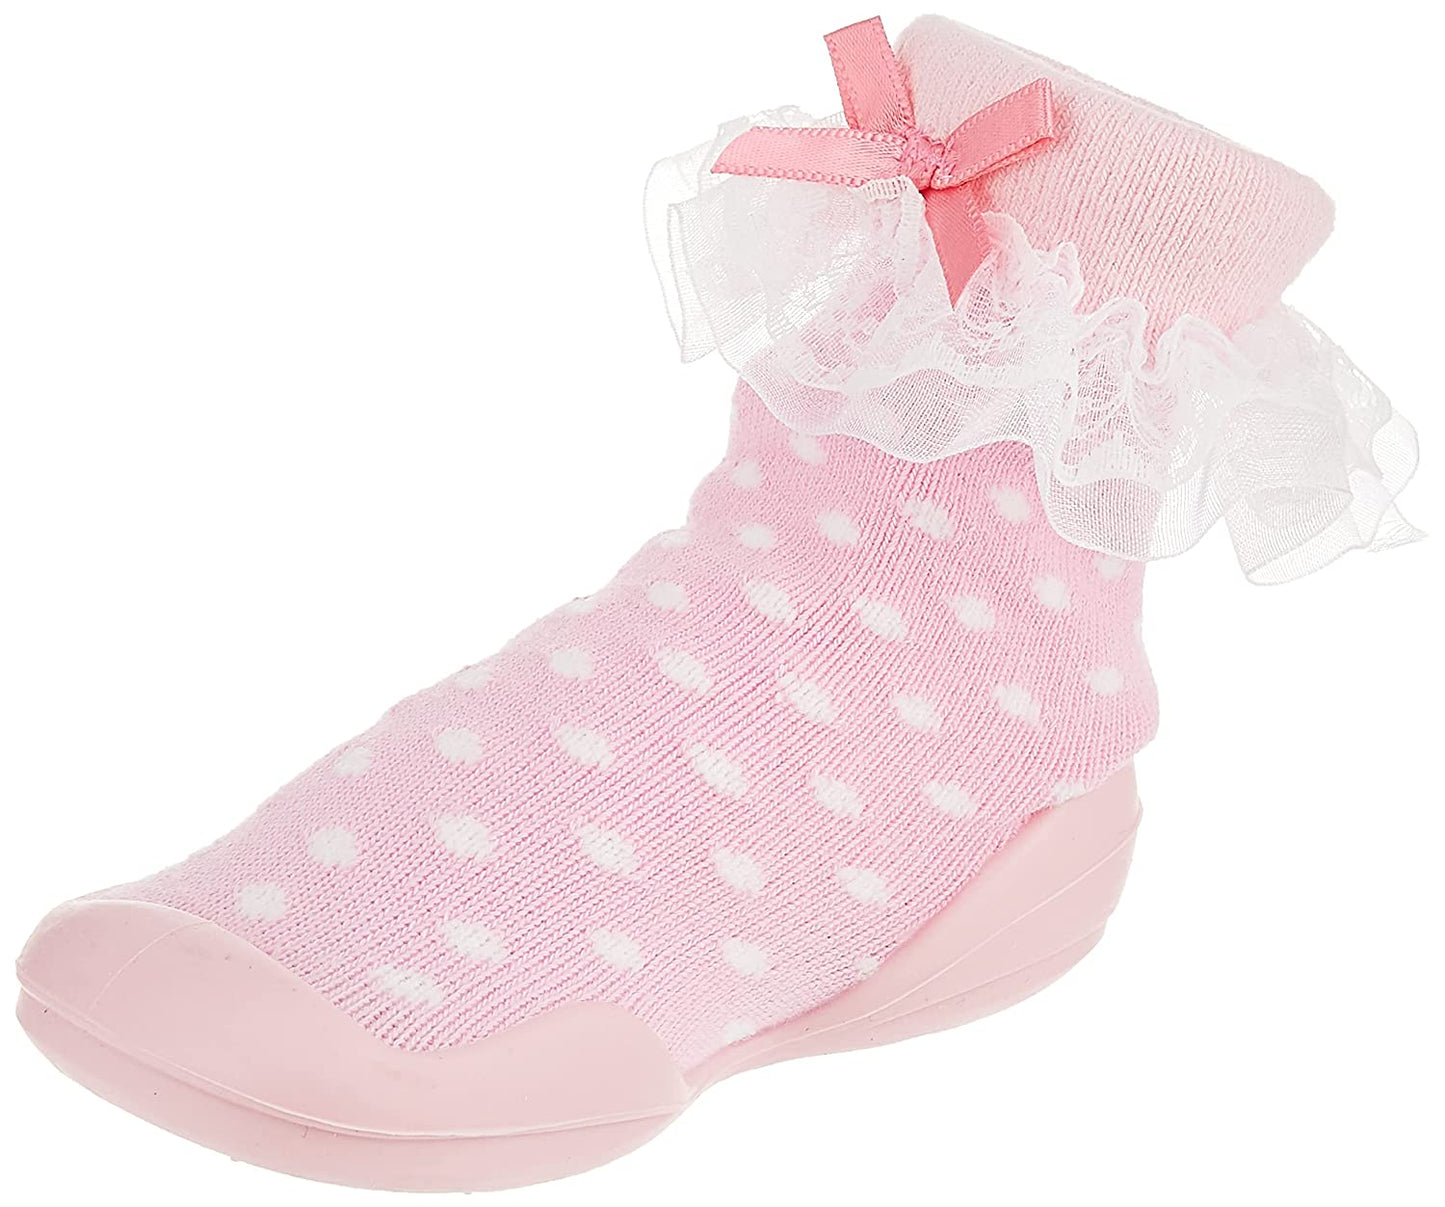 Nuby Snekz Comfortable Rubber Sole Sock Shoes for First Steps